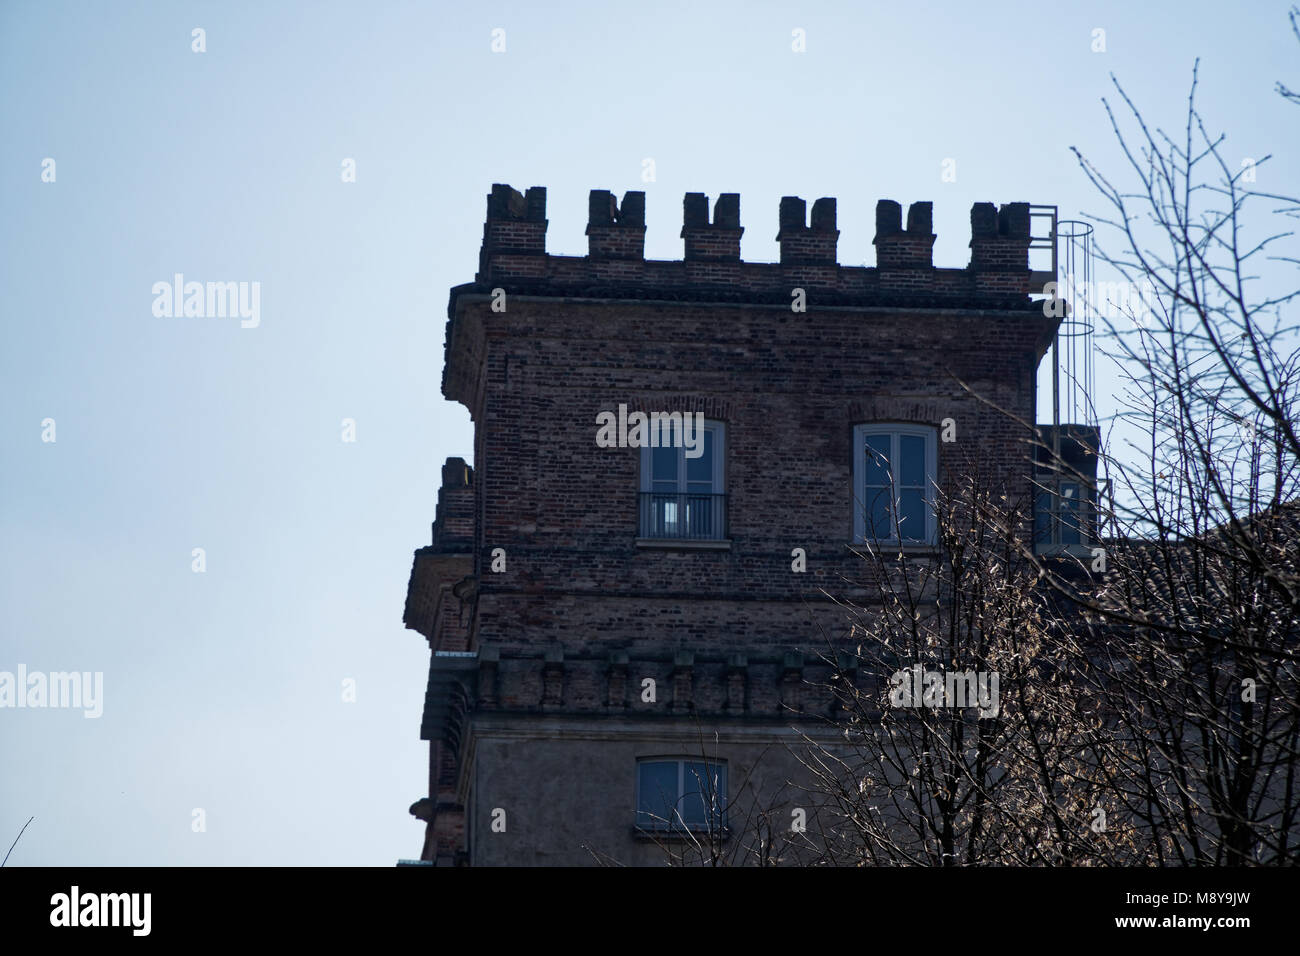 Library, Robecco sul Naviglio, Milan province, Italy, 13 March 2018: Old library in Italy, like castle. Stock Photo